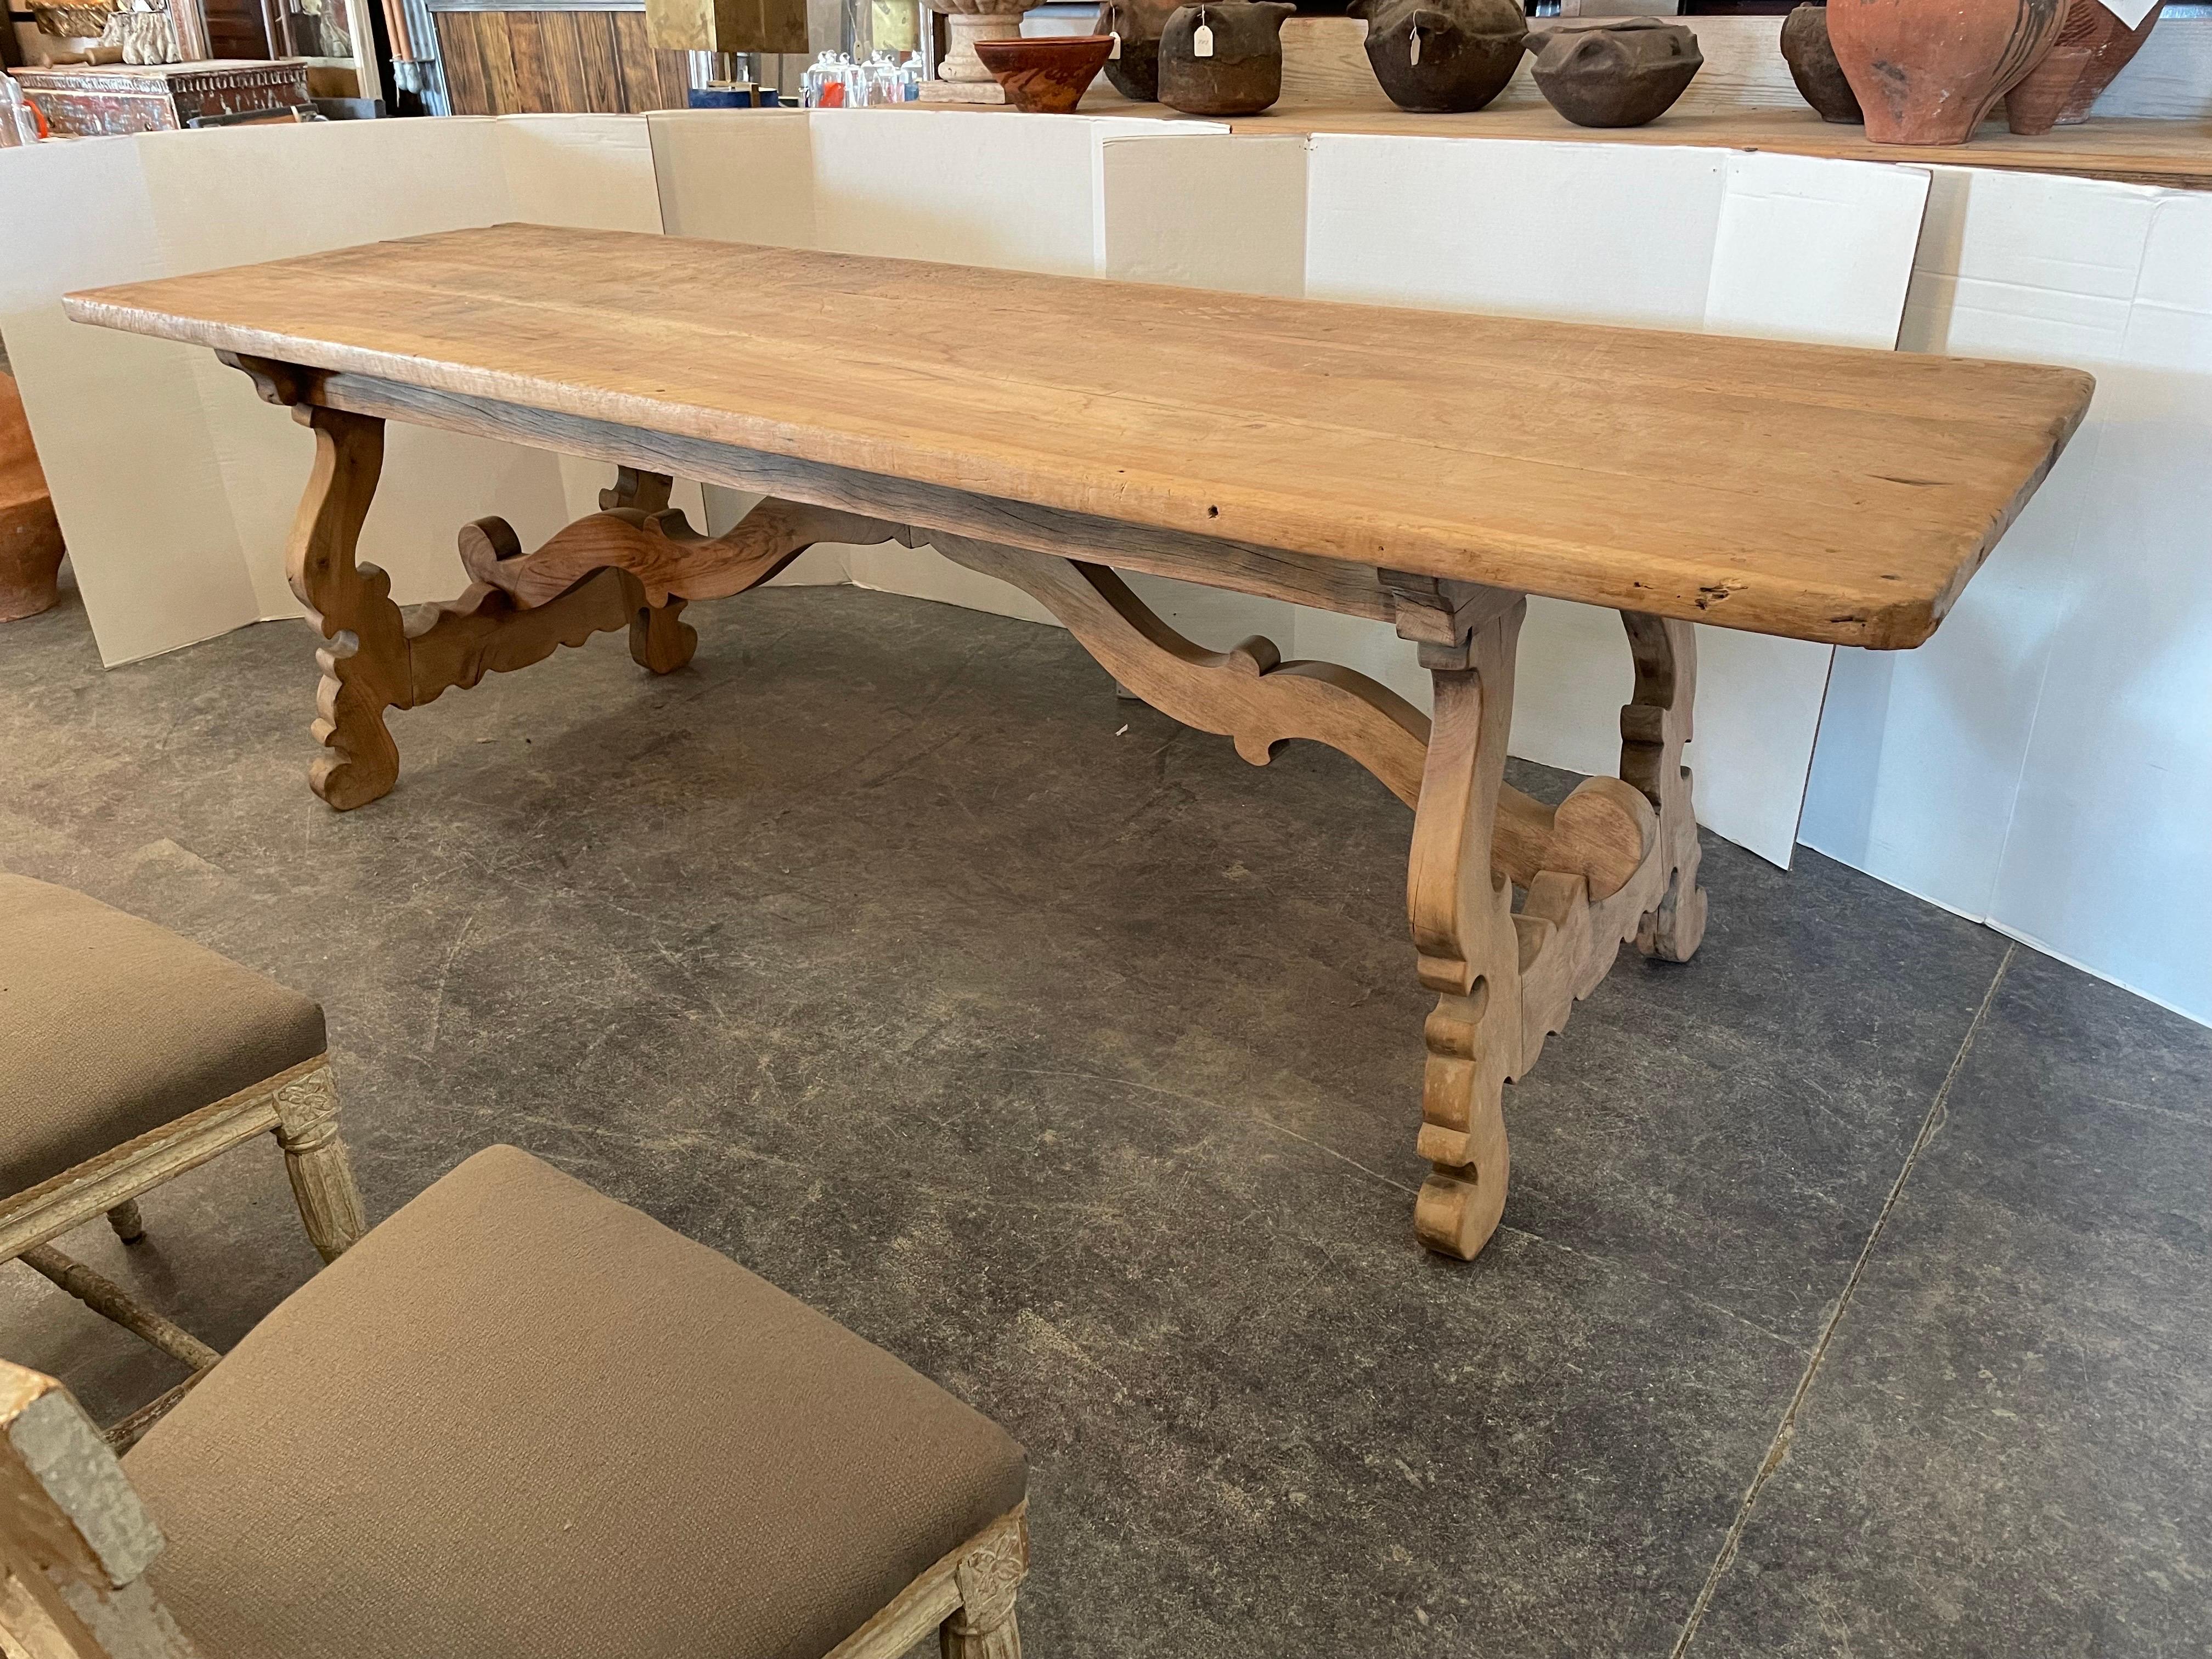 This Italian walnut table originally from Tuscany was made with an 18th century top and 19th century base. The top has the beautiful worn patina consistent with a table of that age. It looks to have bleached as it’s a lighter walnut. It measures